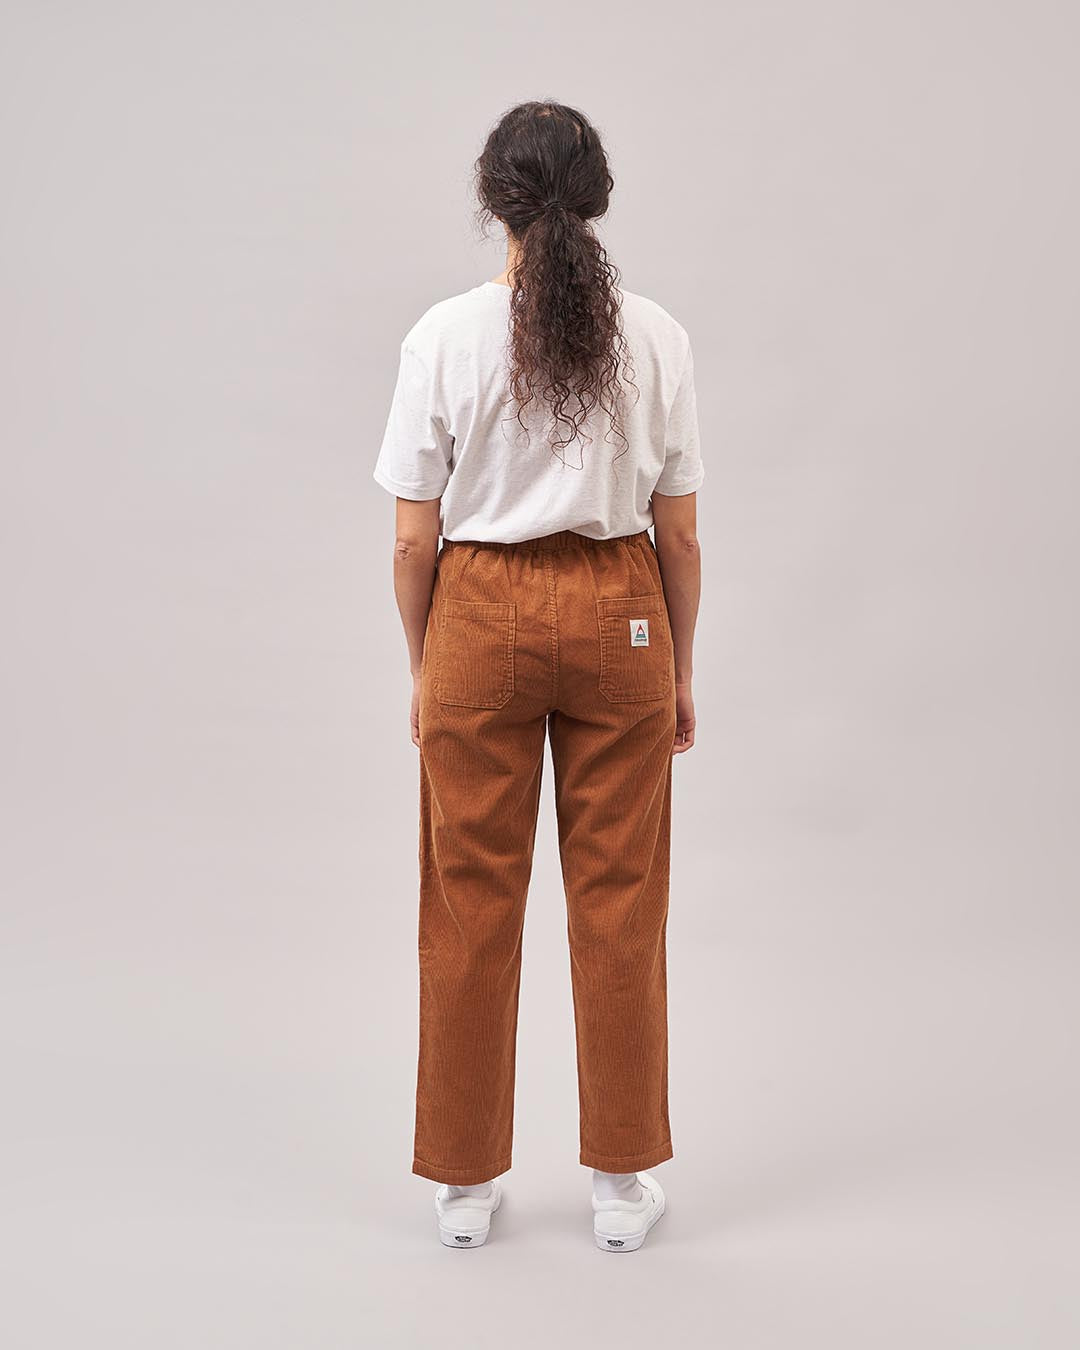 Compass Recycled Corduroy Trouser - Coconut